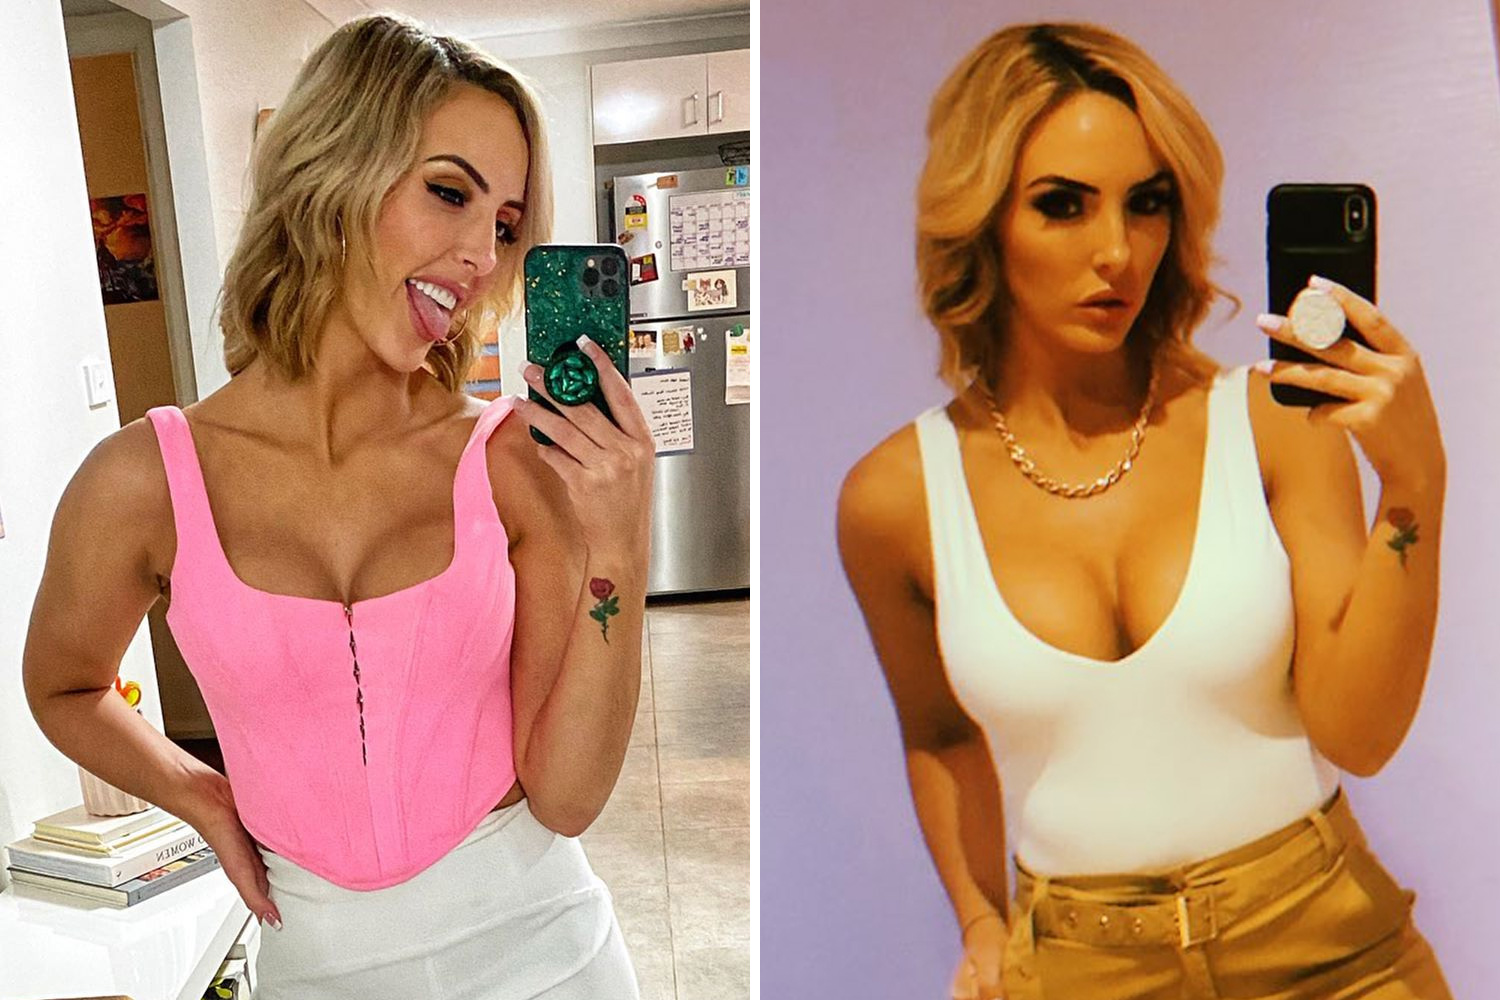 baylee cushman recommends peyton royce topless pic